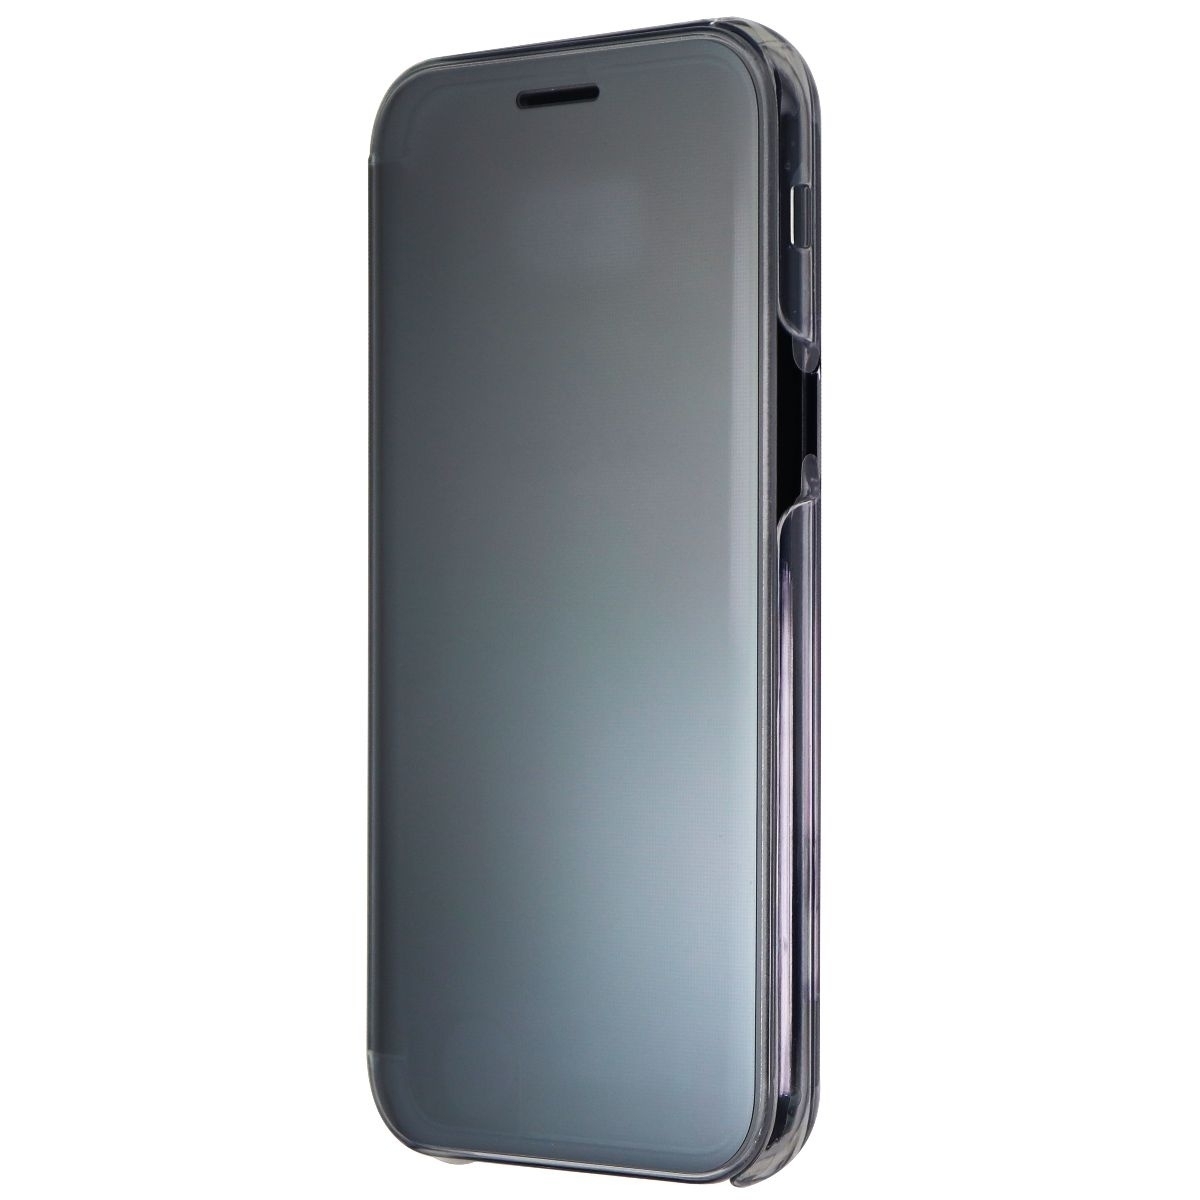 Samsung Clear View Cover Series Case For Samsung Galaxy A5 (2017) - Black